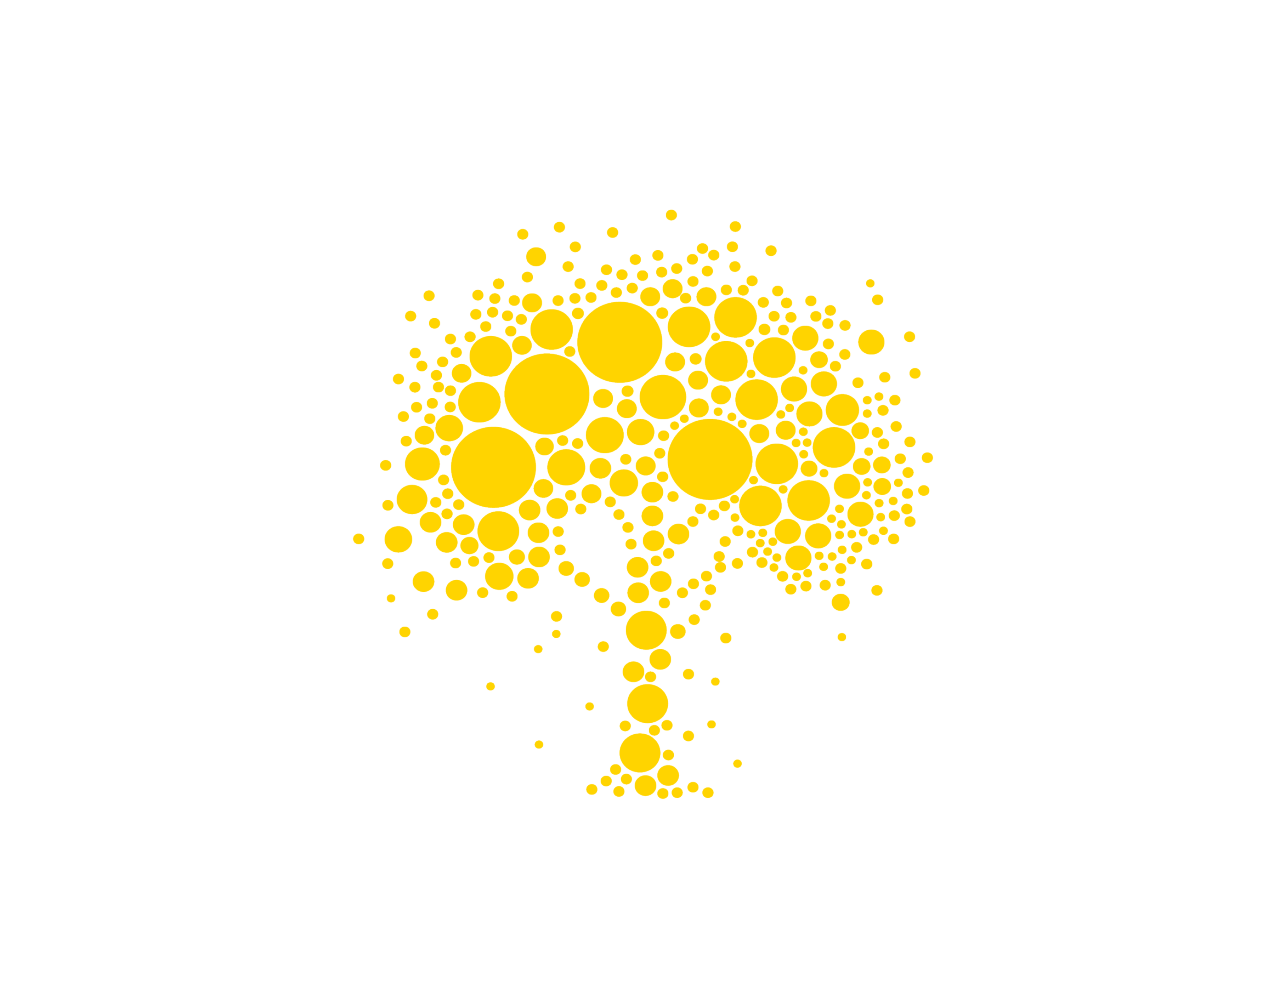 Yellow circles form the shape of a tree